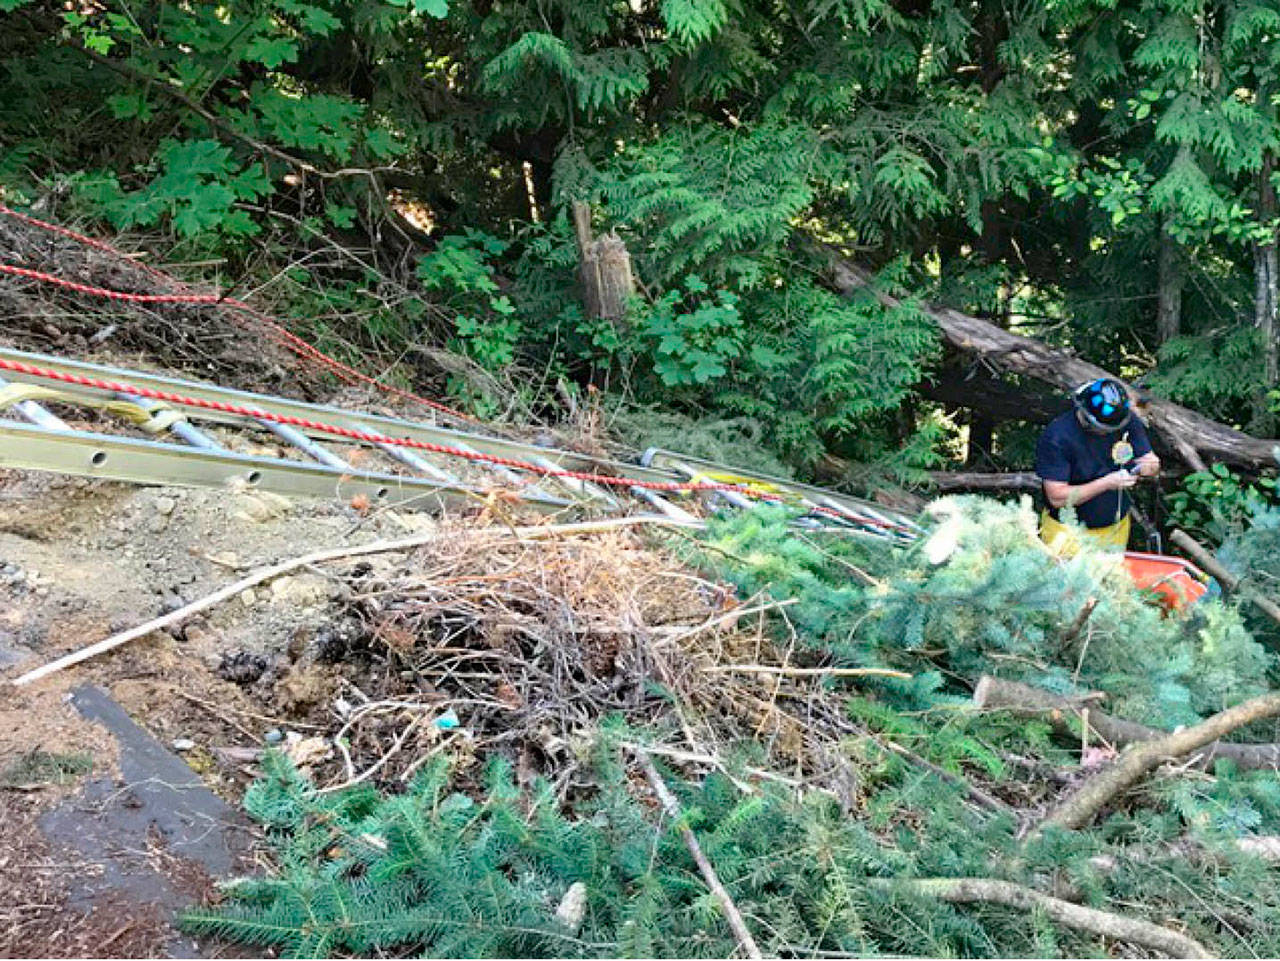 A woman was rescued Tuesday after falling 30 feet down an embankment off Deer Park Road. (Clallam Fire District No. 2)